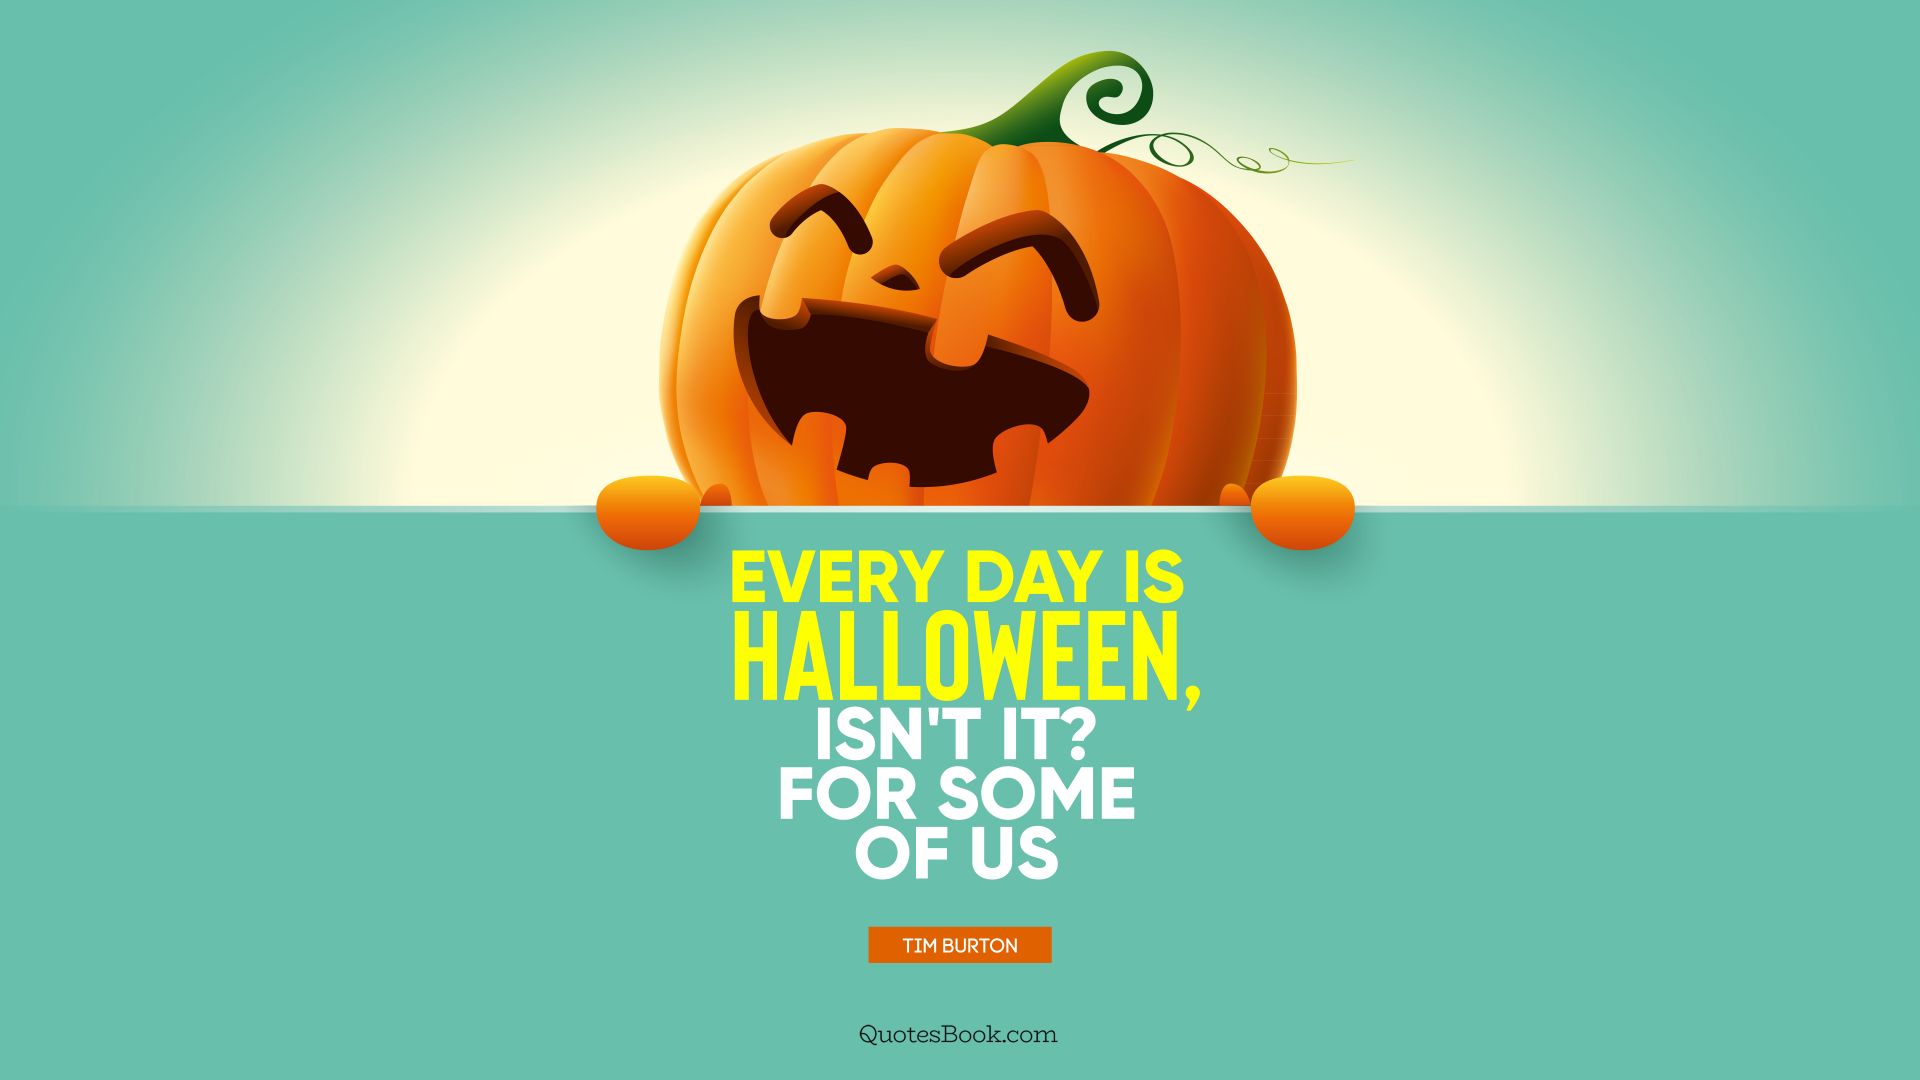 Every day is Halloween, isn't it? For some of us. - Quote by Tim Burton